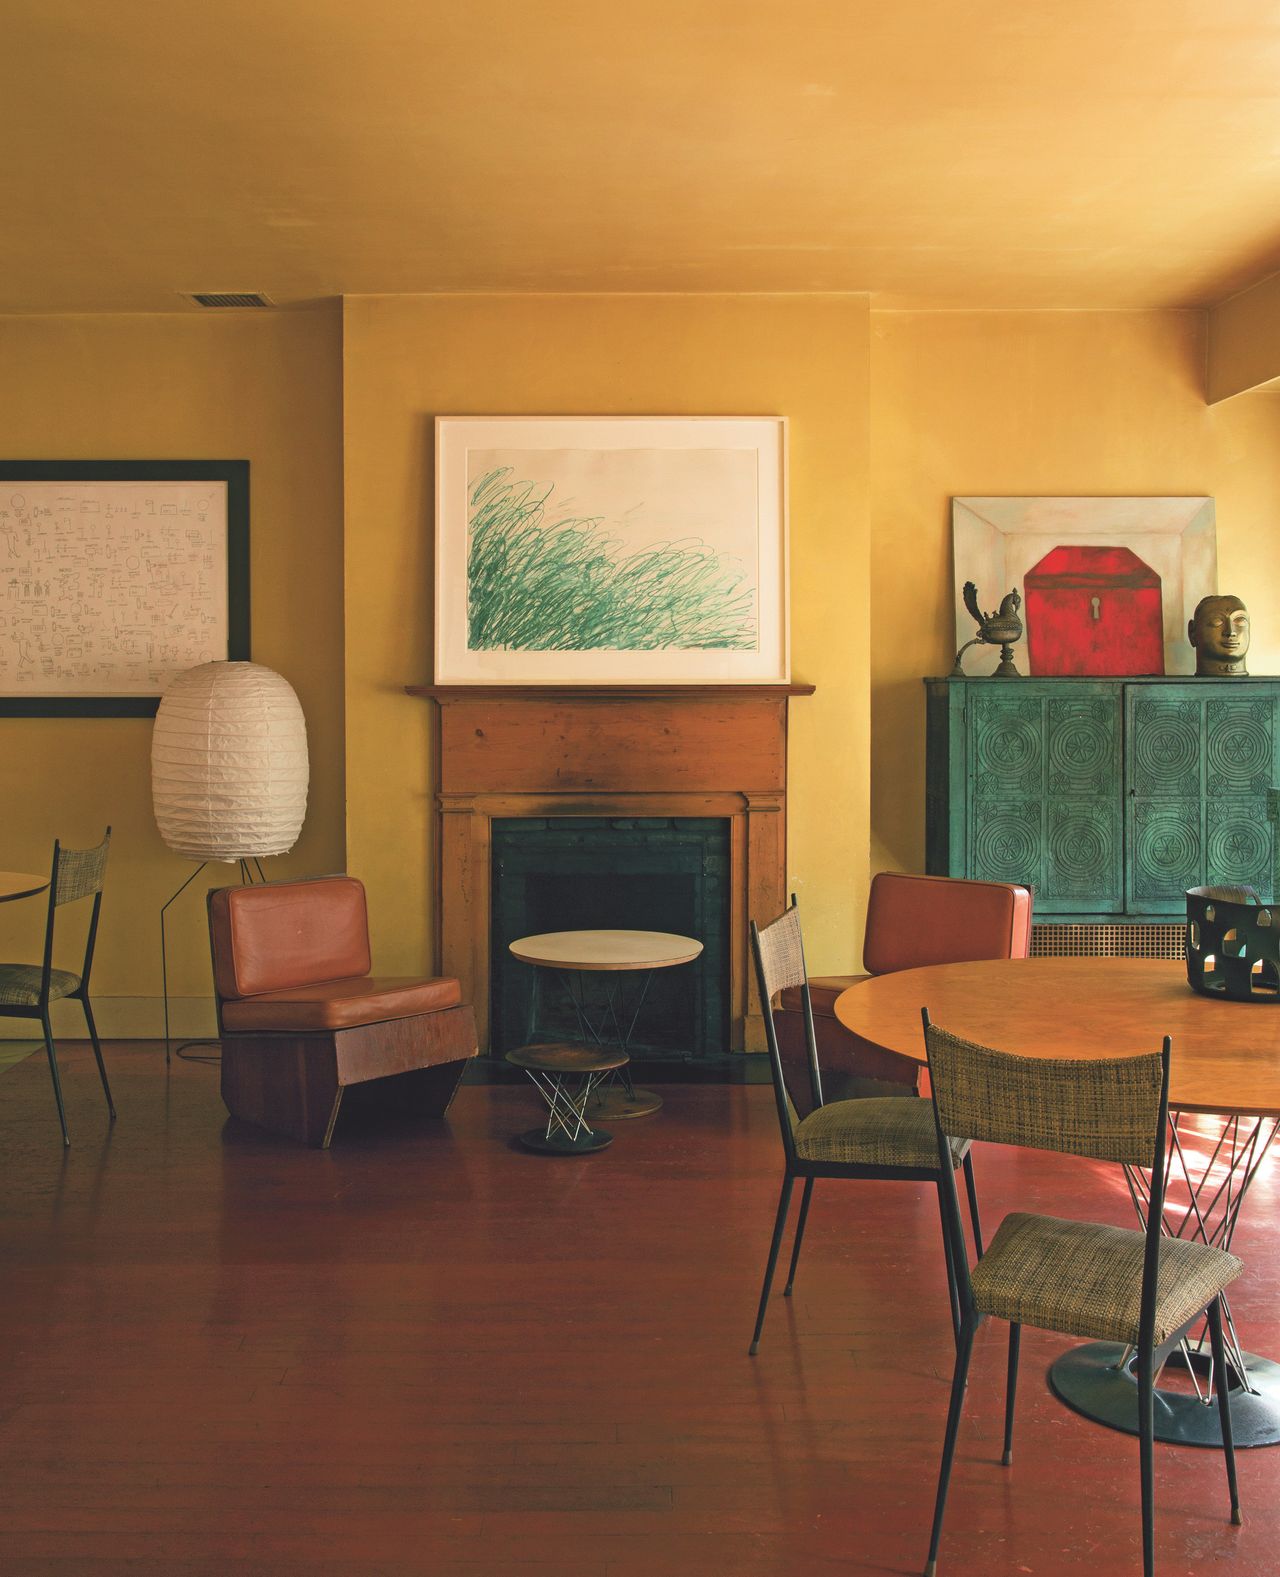 The home of Francesco Clemente: A drawing by Cy Twombly over the fireplace is flanked by a Jean-Michel Basquiat drawing and a painting by Clemente in the dining area. The furniture includes tables by Isamu Noguchi and wooden chairs by Frank Lloyd Wright.